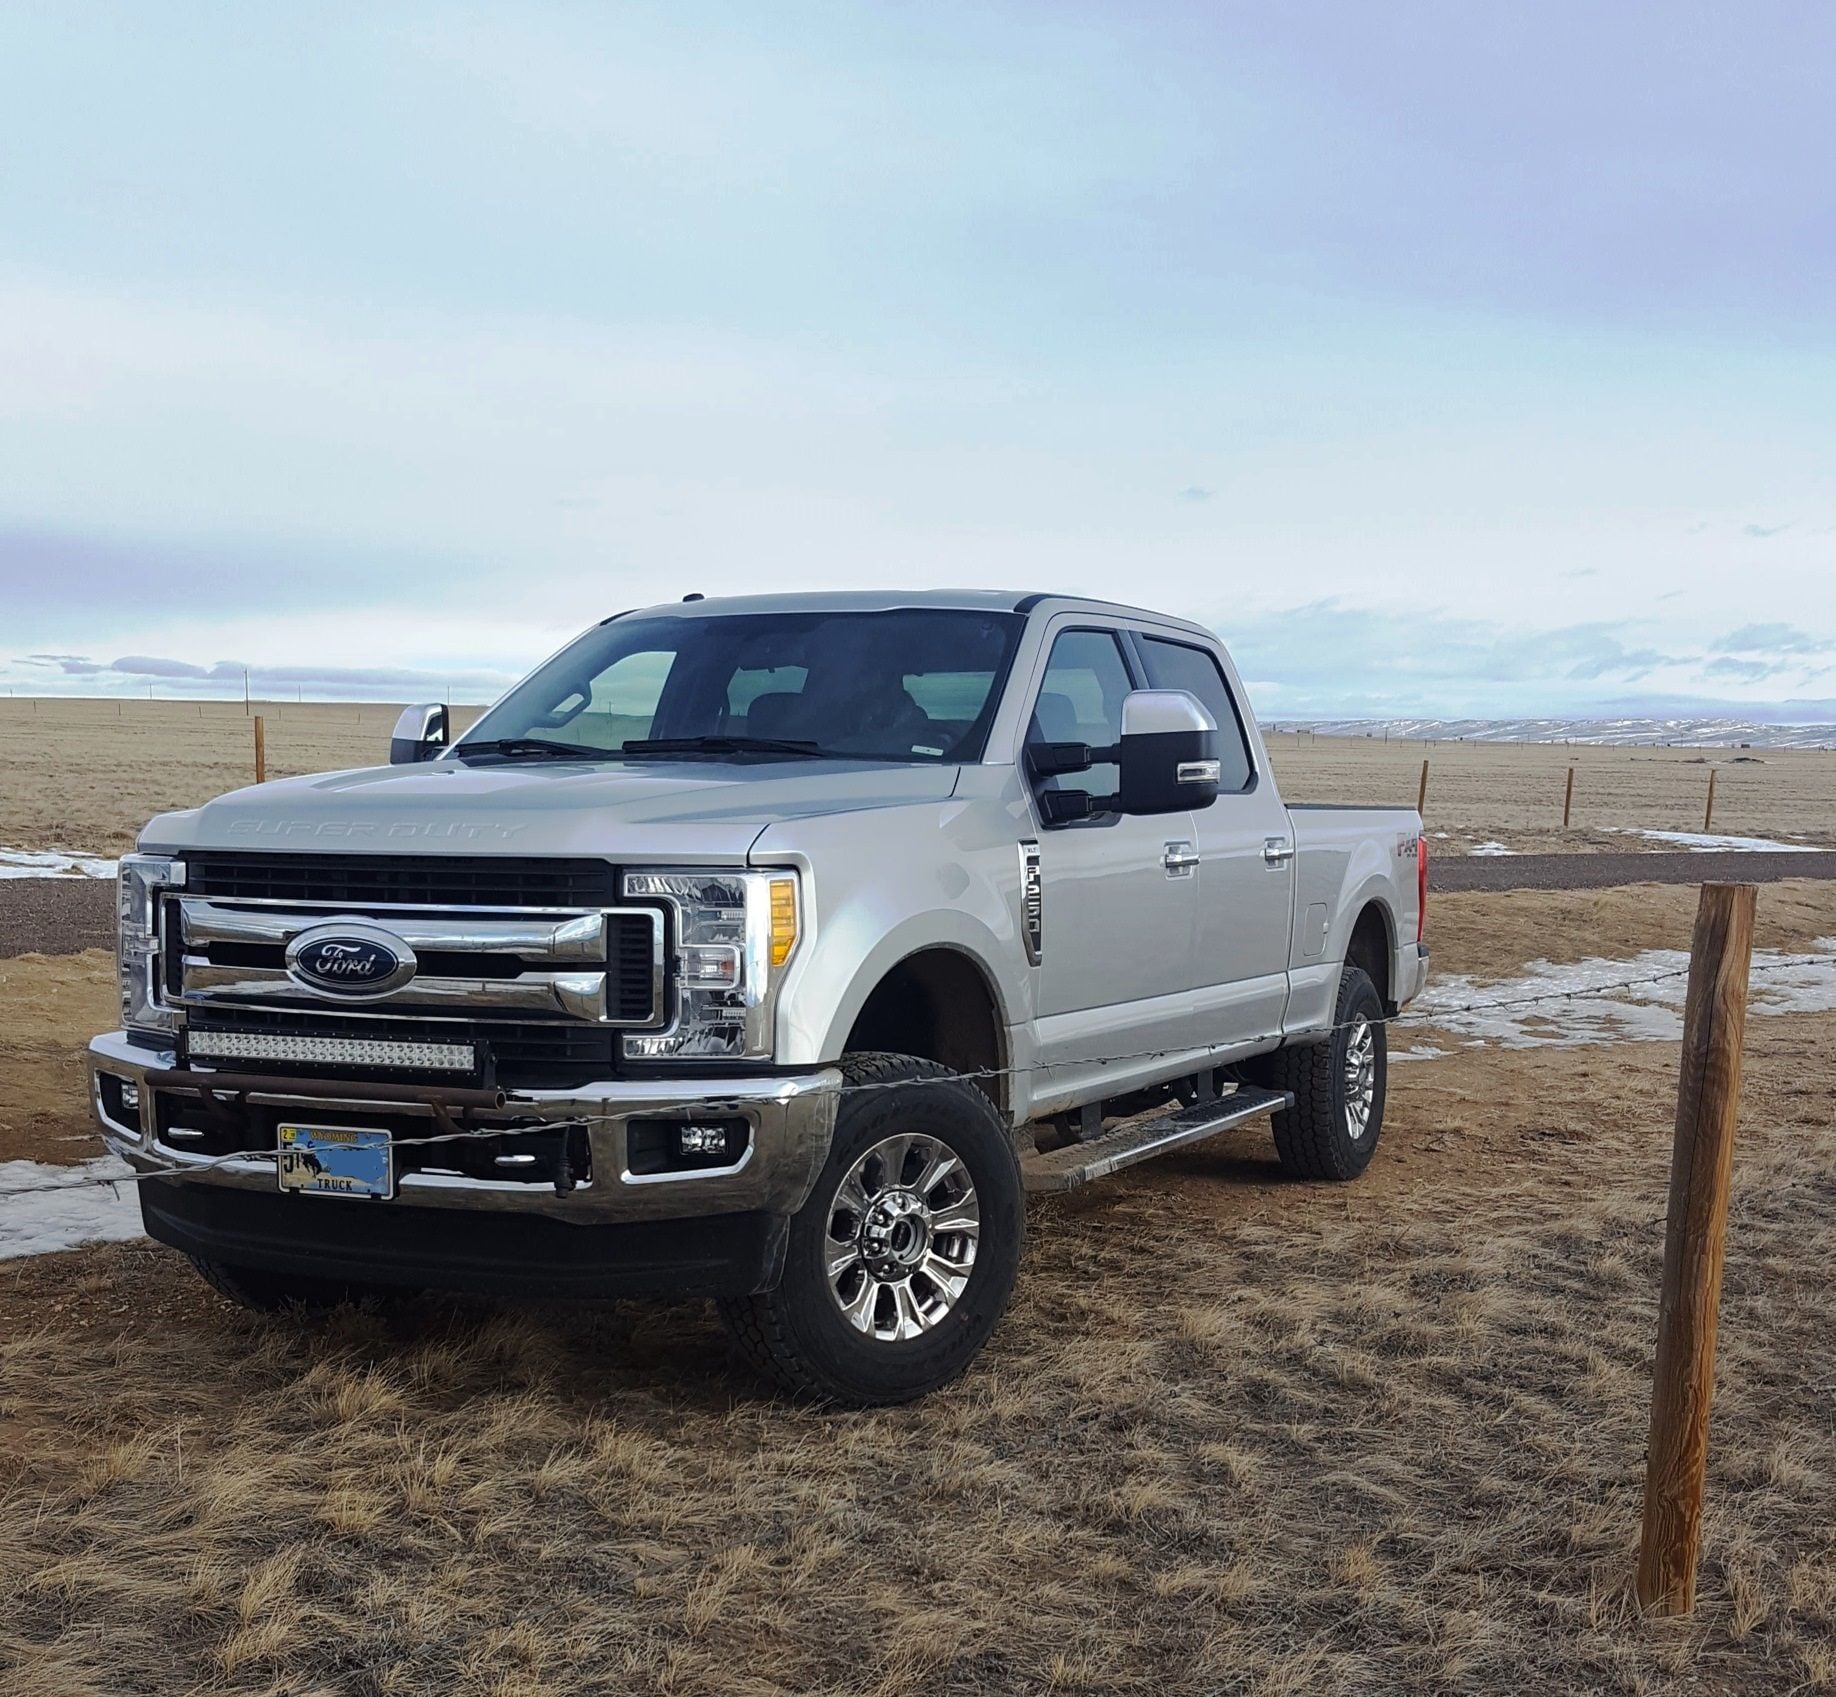 2017 Ford F-250 Super Duty - 2017 F250 CC XLT Premium FX4 6.2L only 15K miles - Used - VIN 1FT7W2B6XHEE95820 - 14,500 Miles - 8 cyl - 4WD - Automatic - Truck - Silver - Laramie, WY 82070, United States